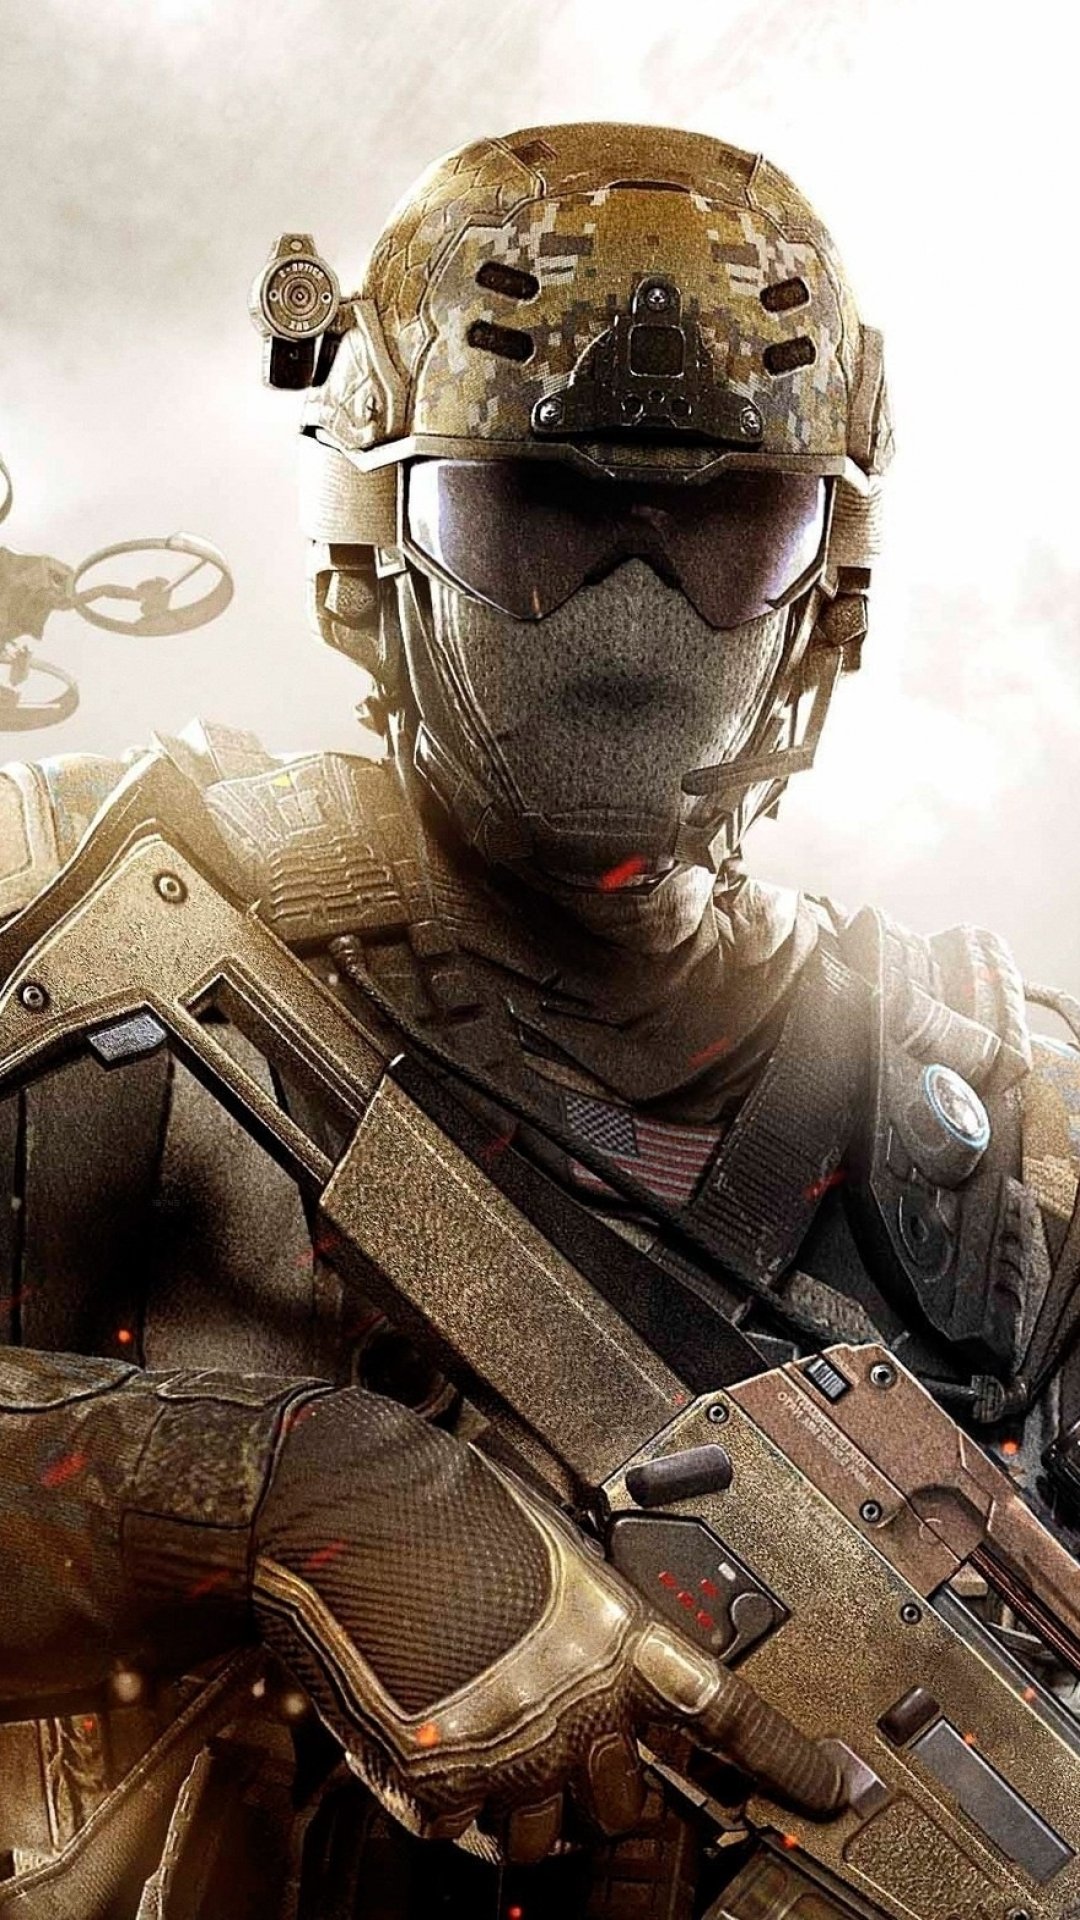 A fierce soldier from Call of Duty: Black Ops II in action, ready for battle on this phone wallpaper.